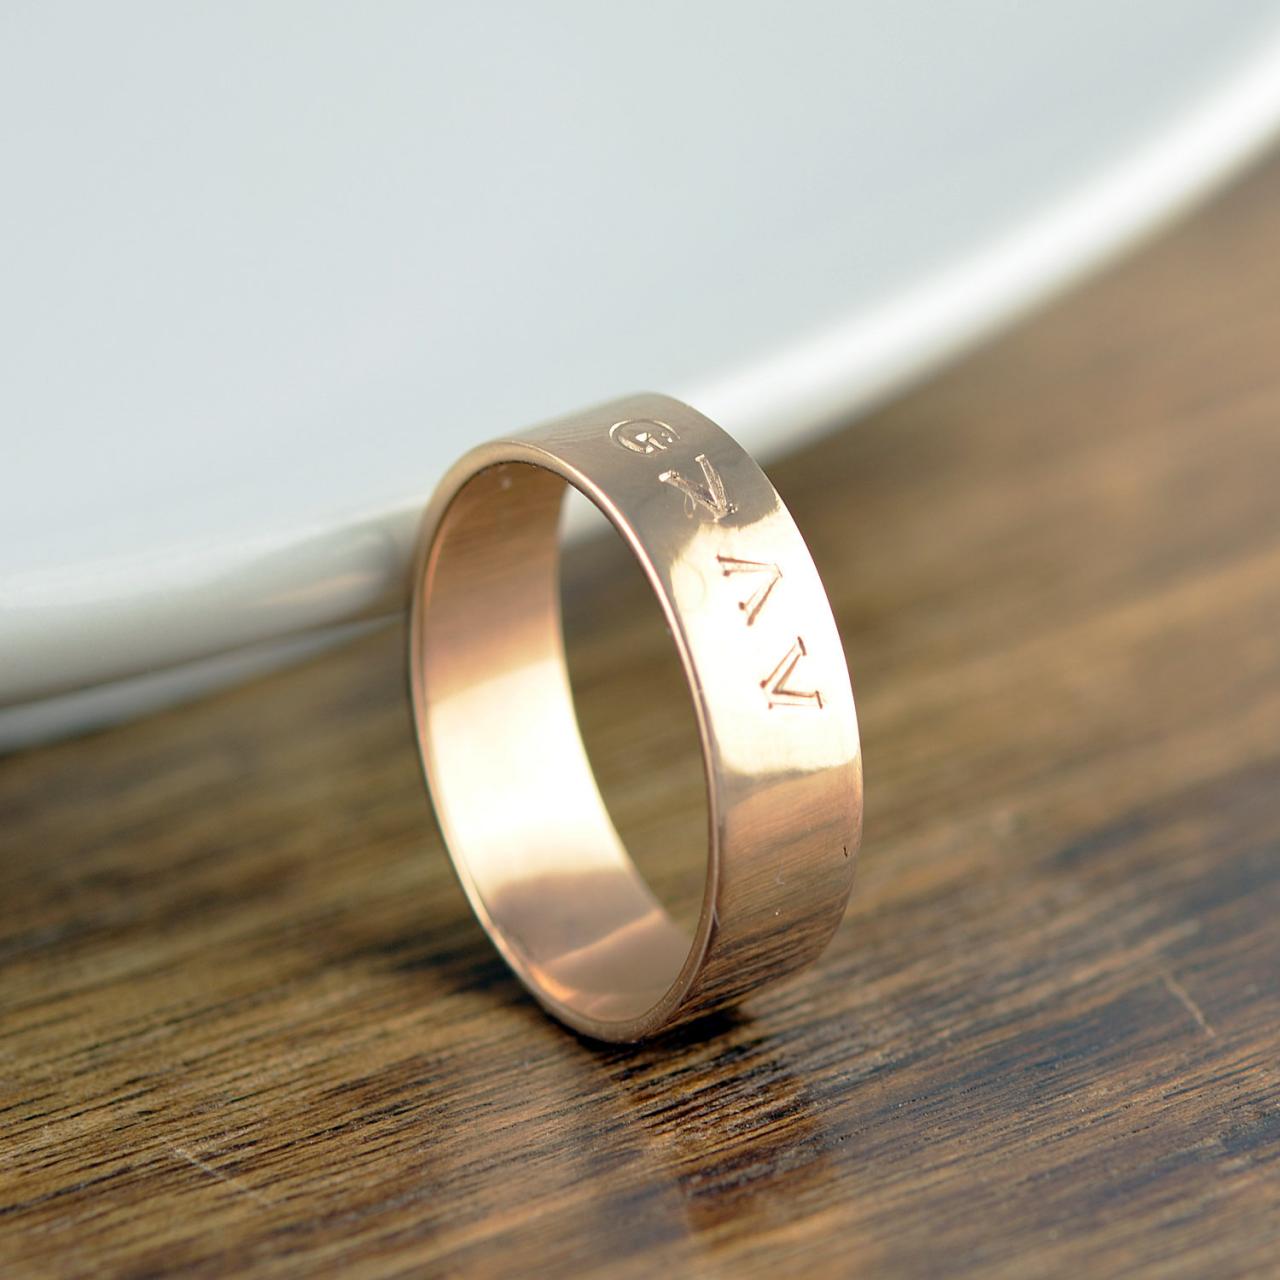 Personalized Ring, God Is Greater Than The Highs And Lows, Religious Ring, Inspirational Jewelry, Gift For Her, Unique Gift, Custom Ring